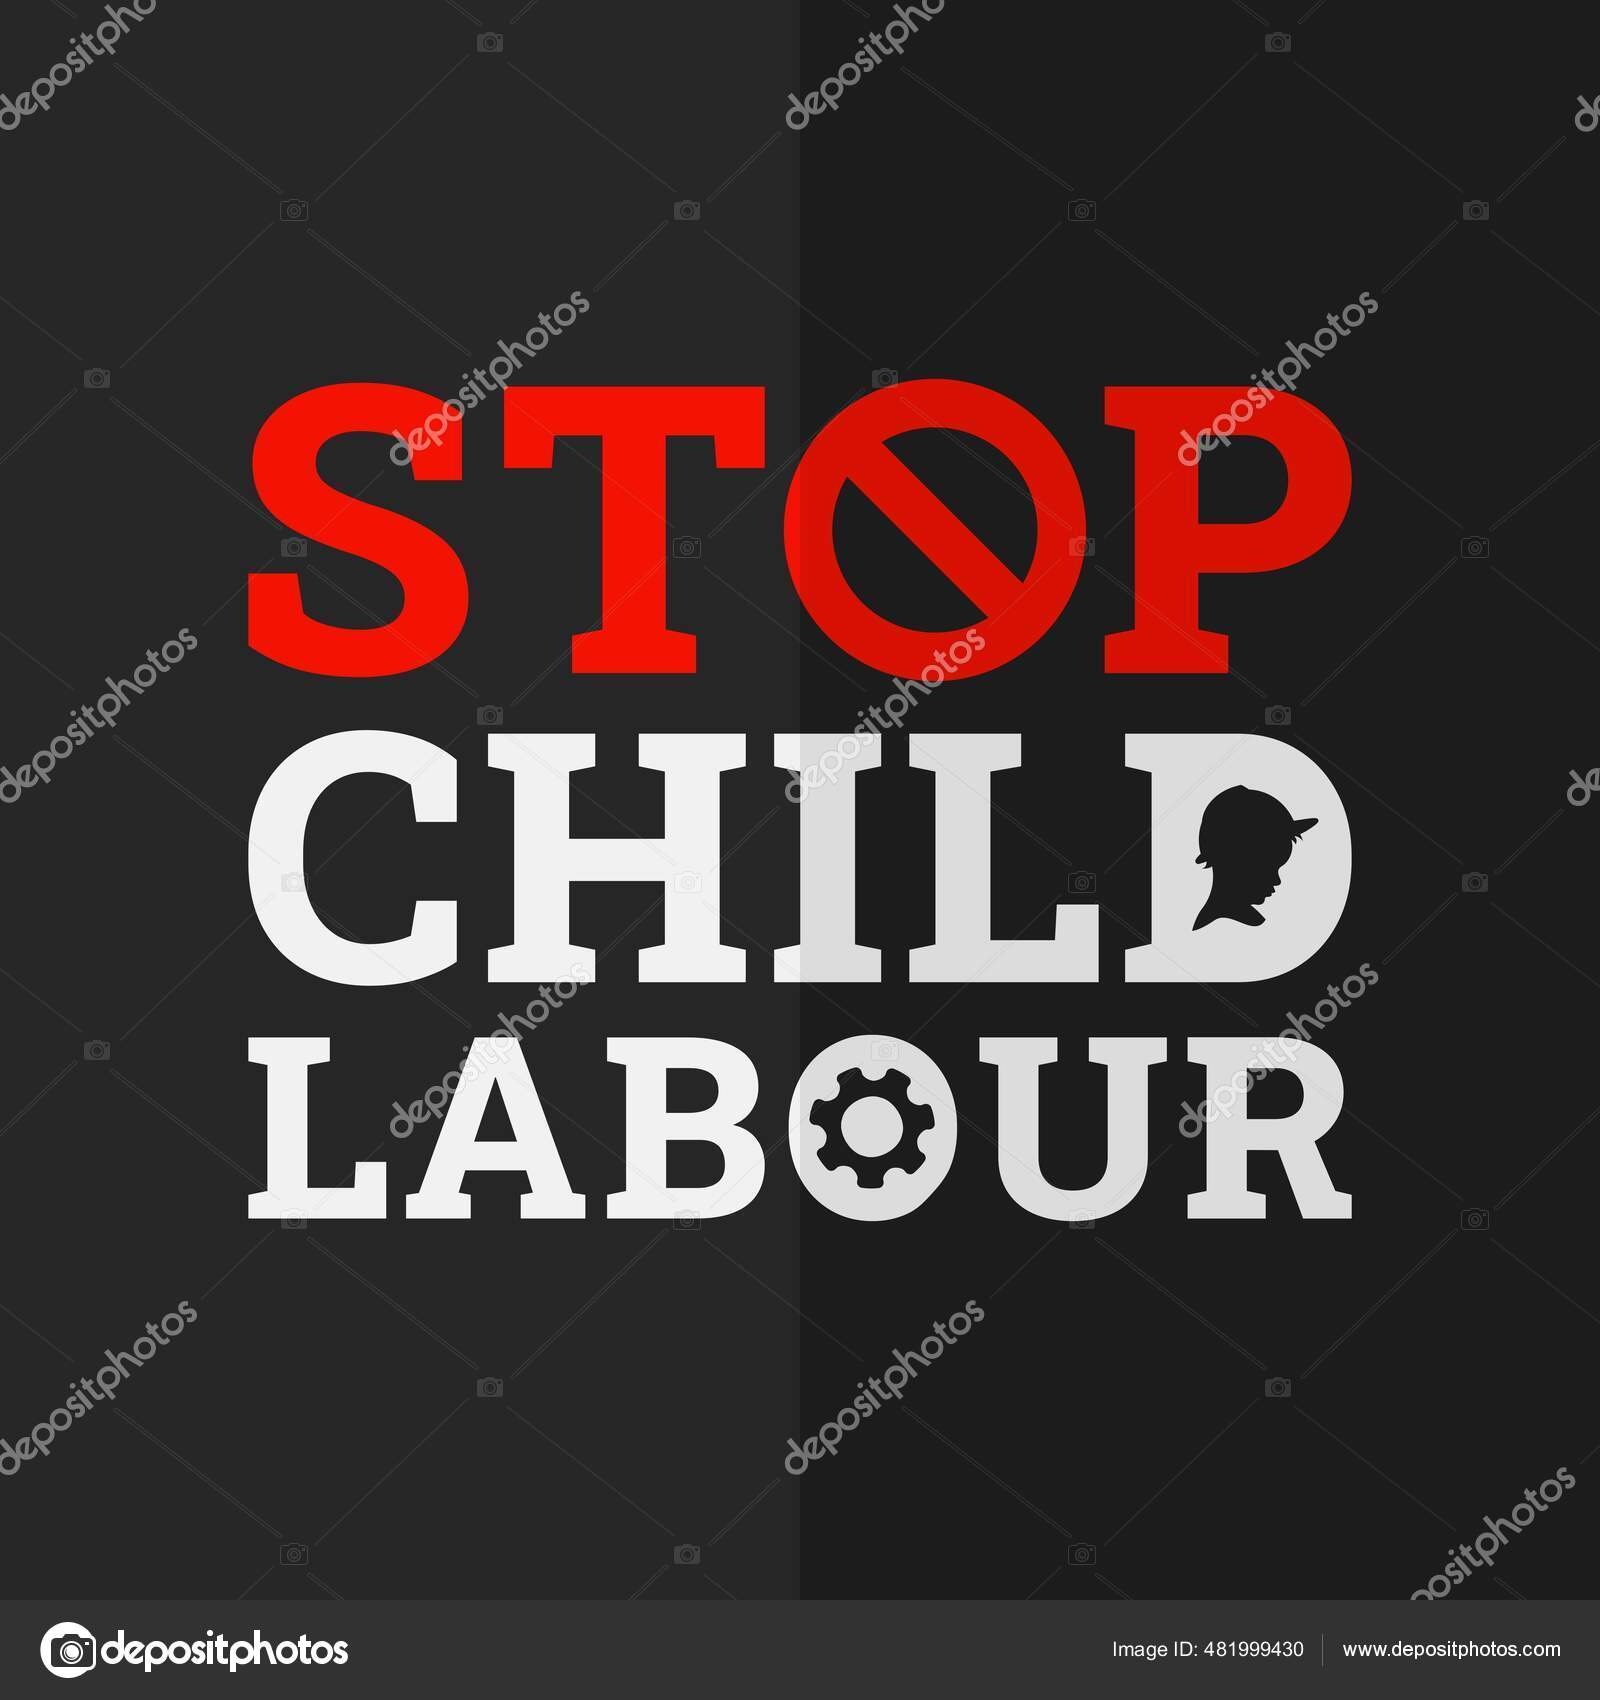 HISTORY OF CHILD LABOR - Rights and Responsibilities of Child Labor